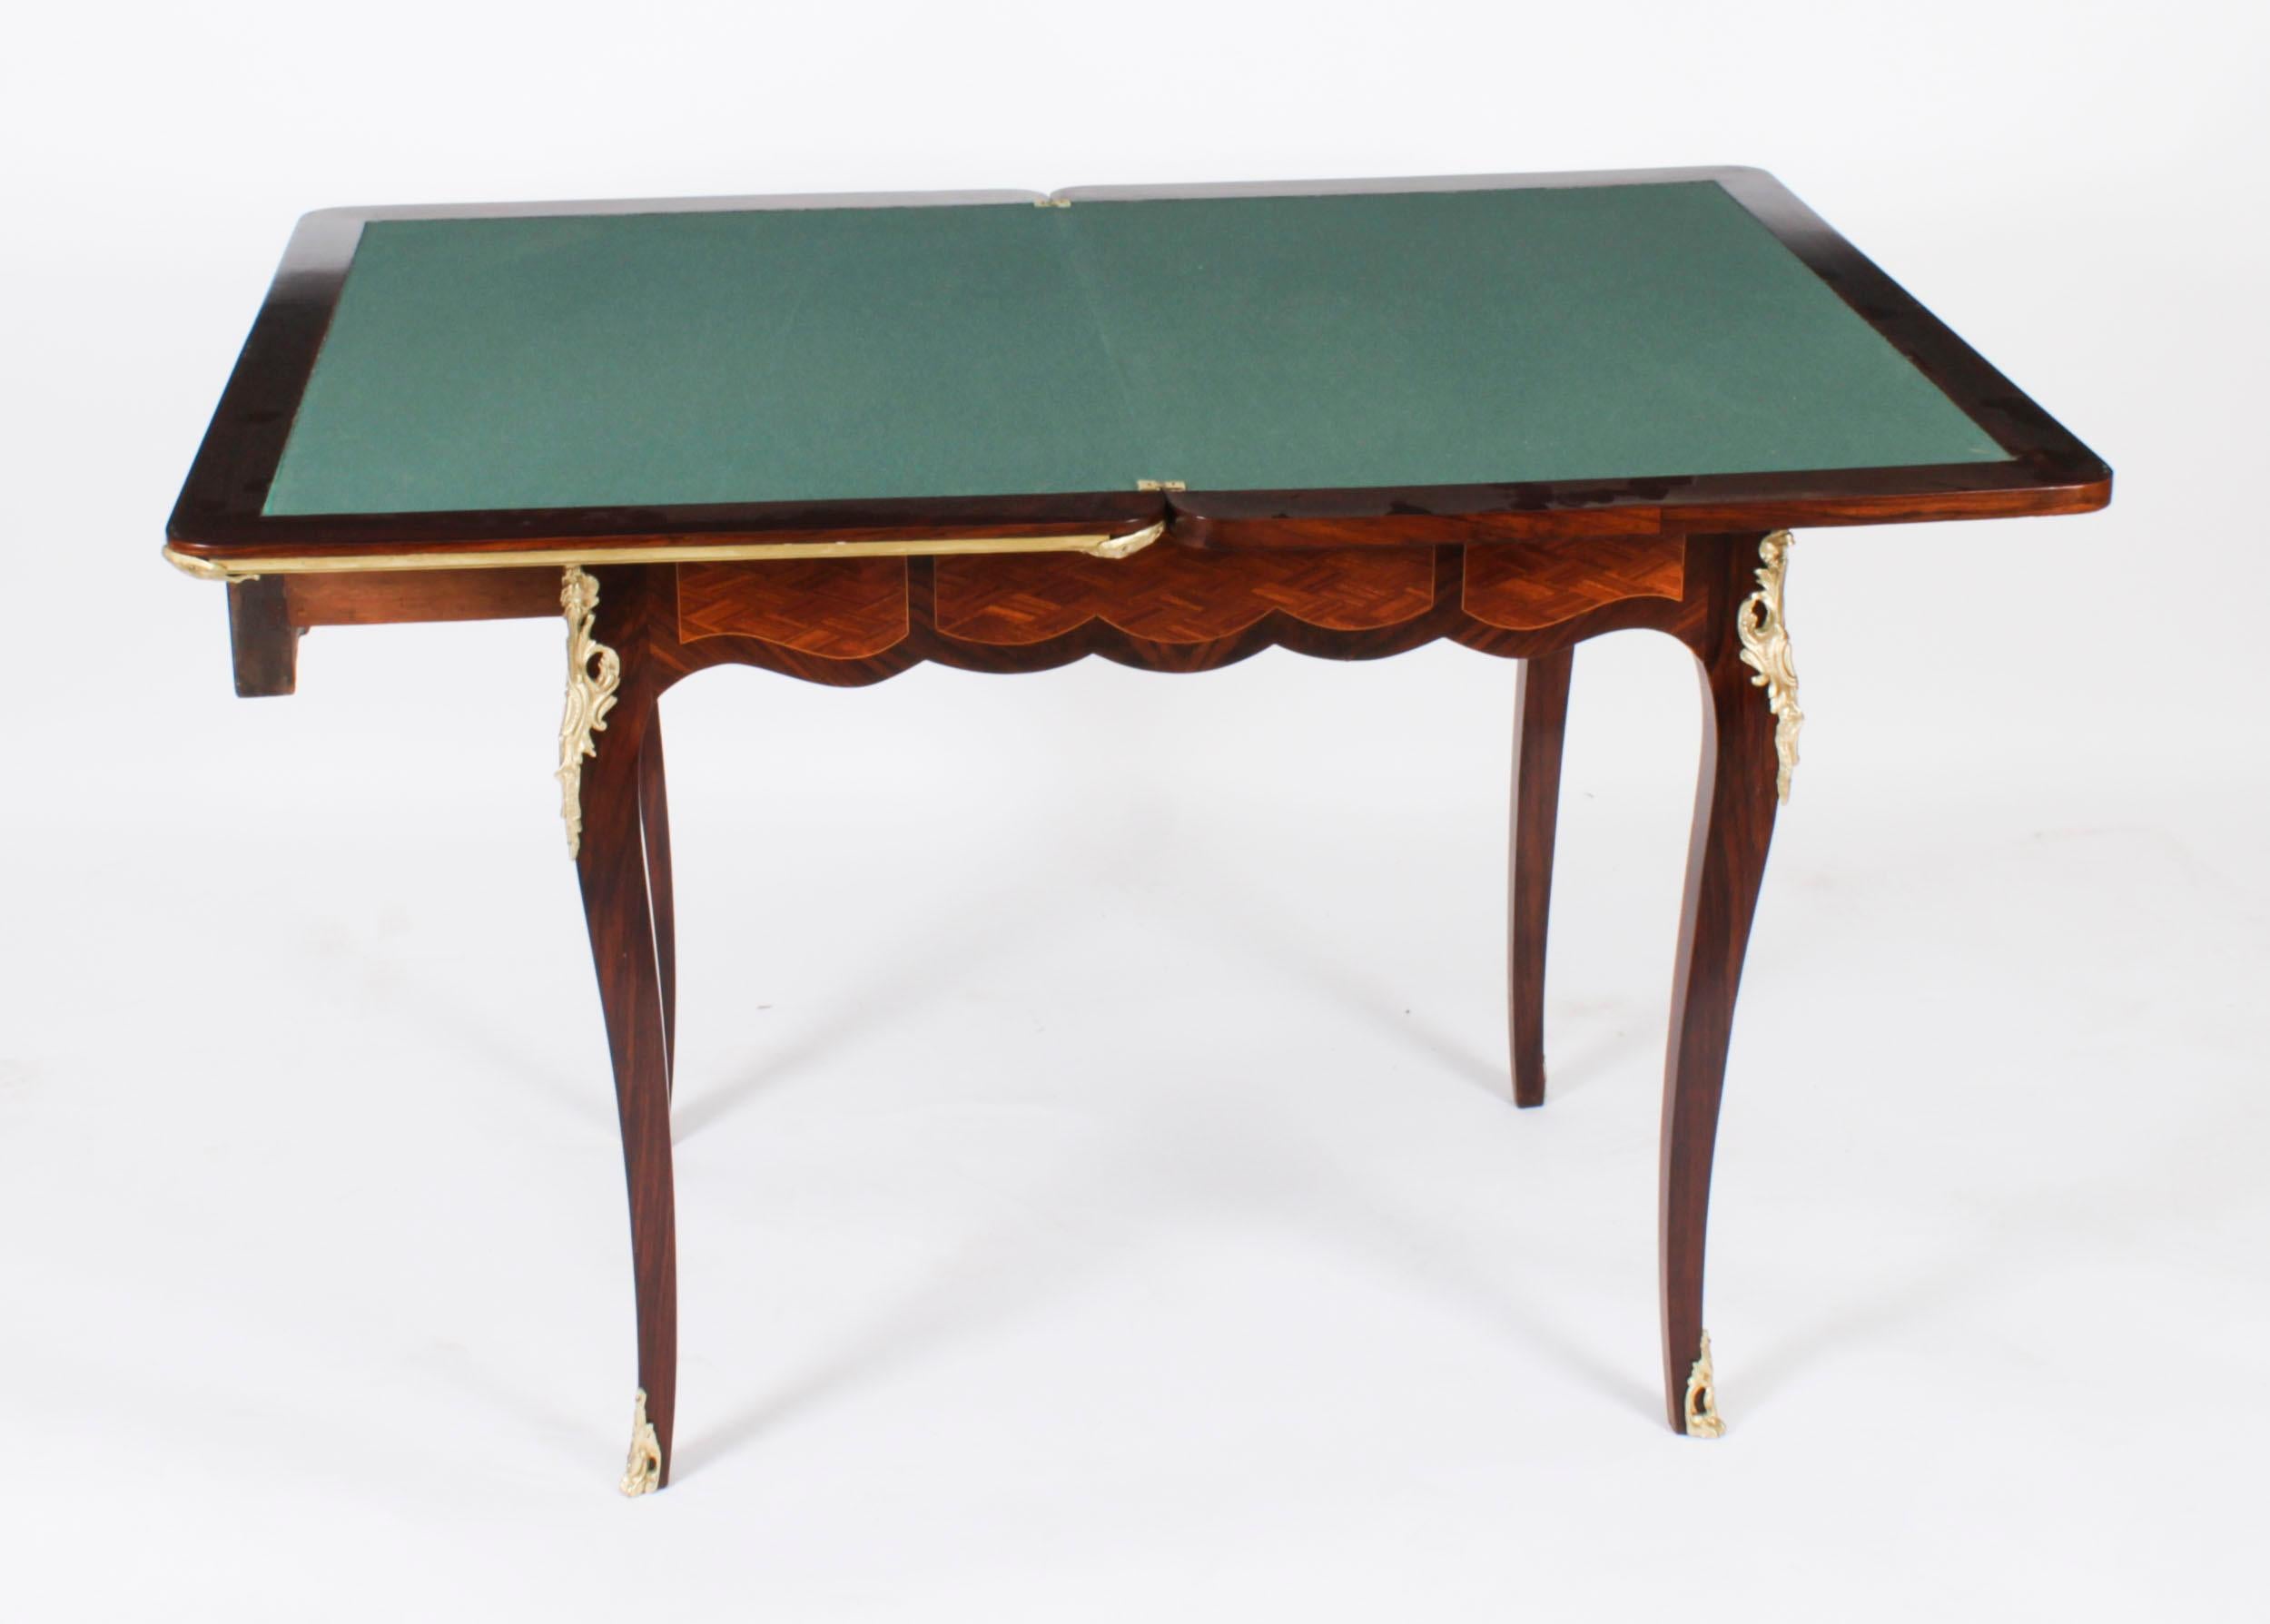 A truly fabulous antique French parquetry turnover top games table, circa 1880 in date.

The top with ormolu banded edge, the parquetry decoration exhibits a stunning array of exotic woods.

The attractive ormolu mounts only enhance the overall